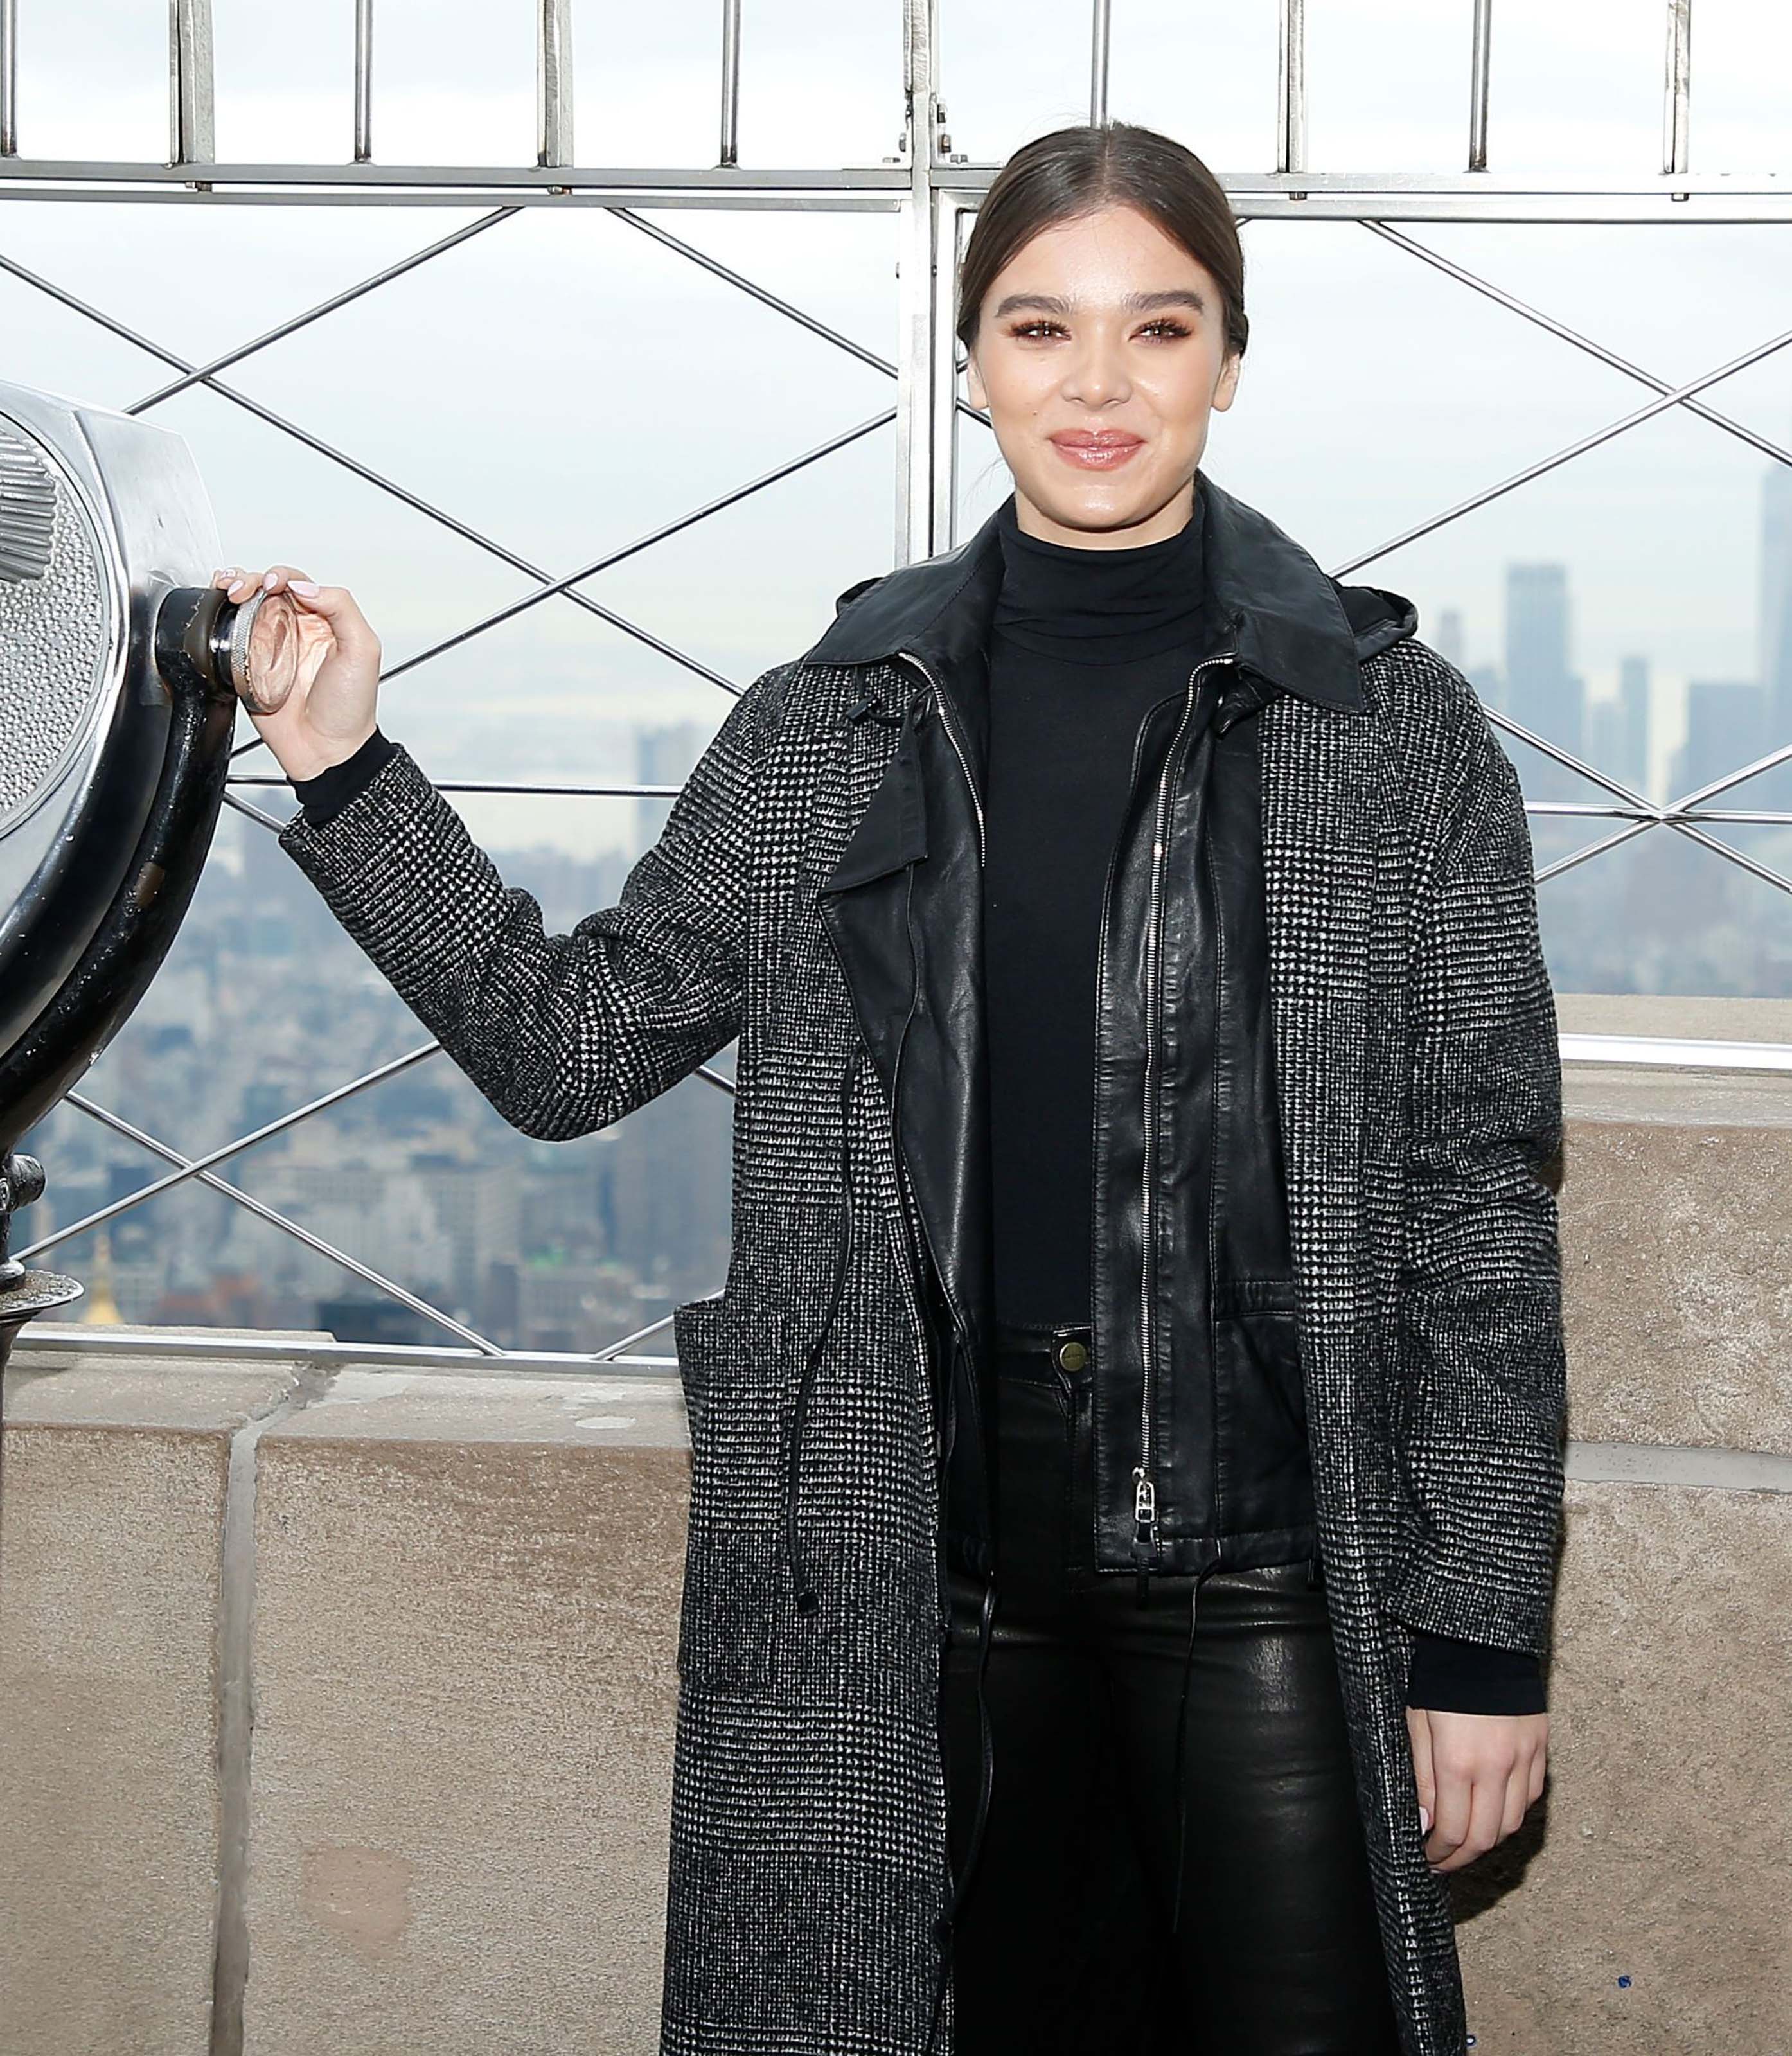 Hailee Steinfeld at the Empire State Building